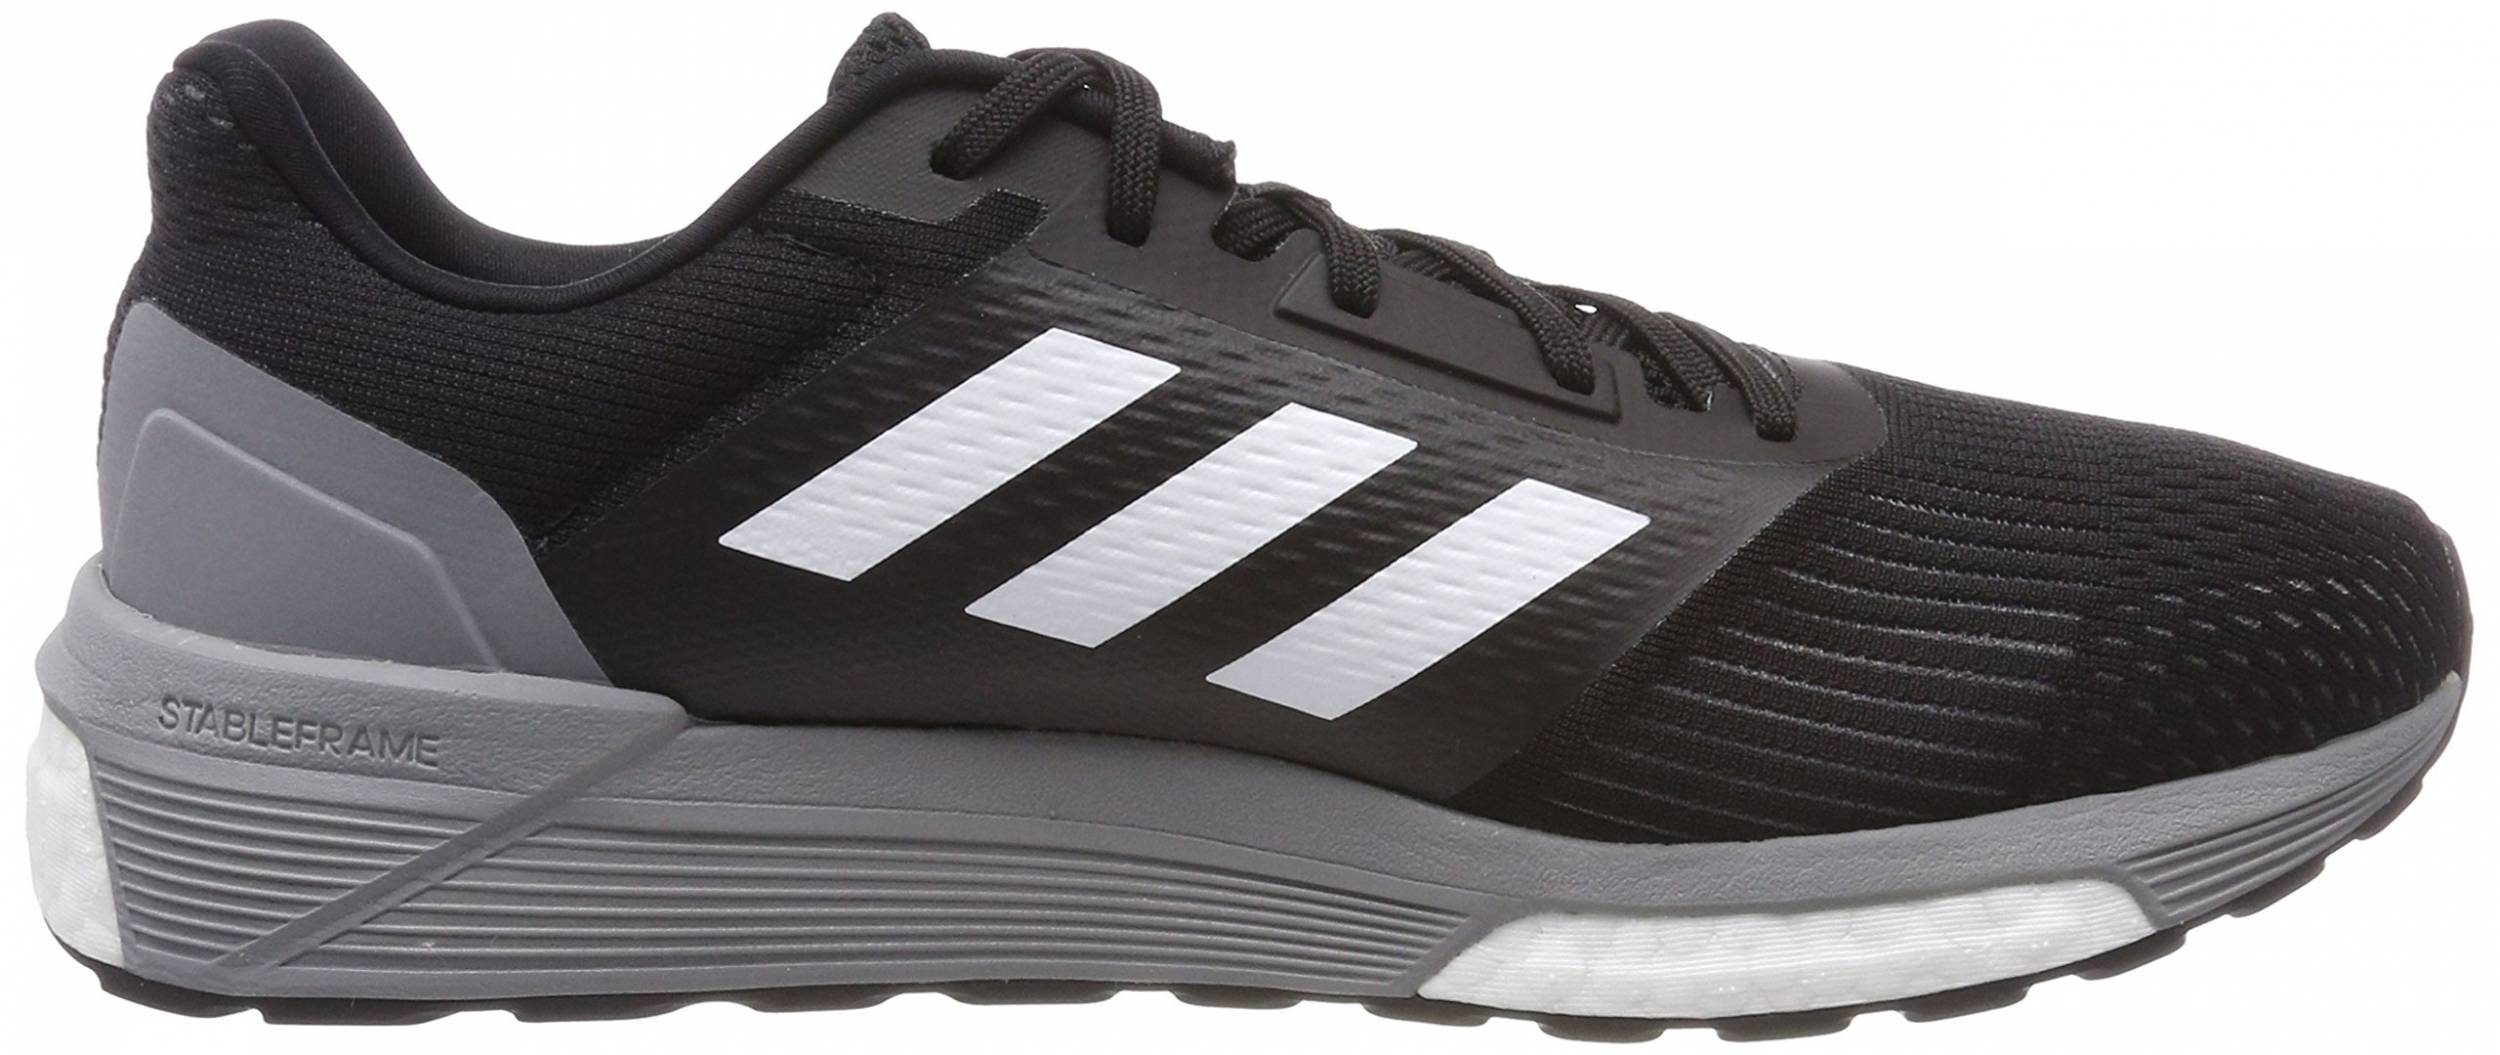 adidas structured running shoes